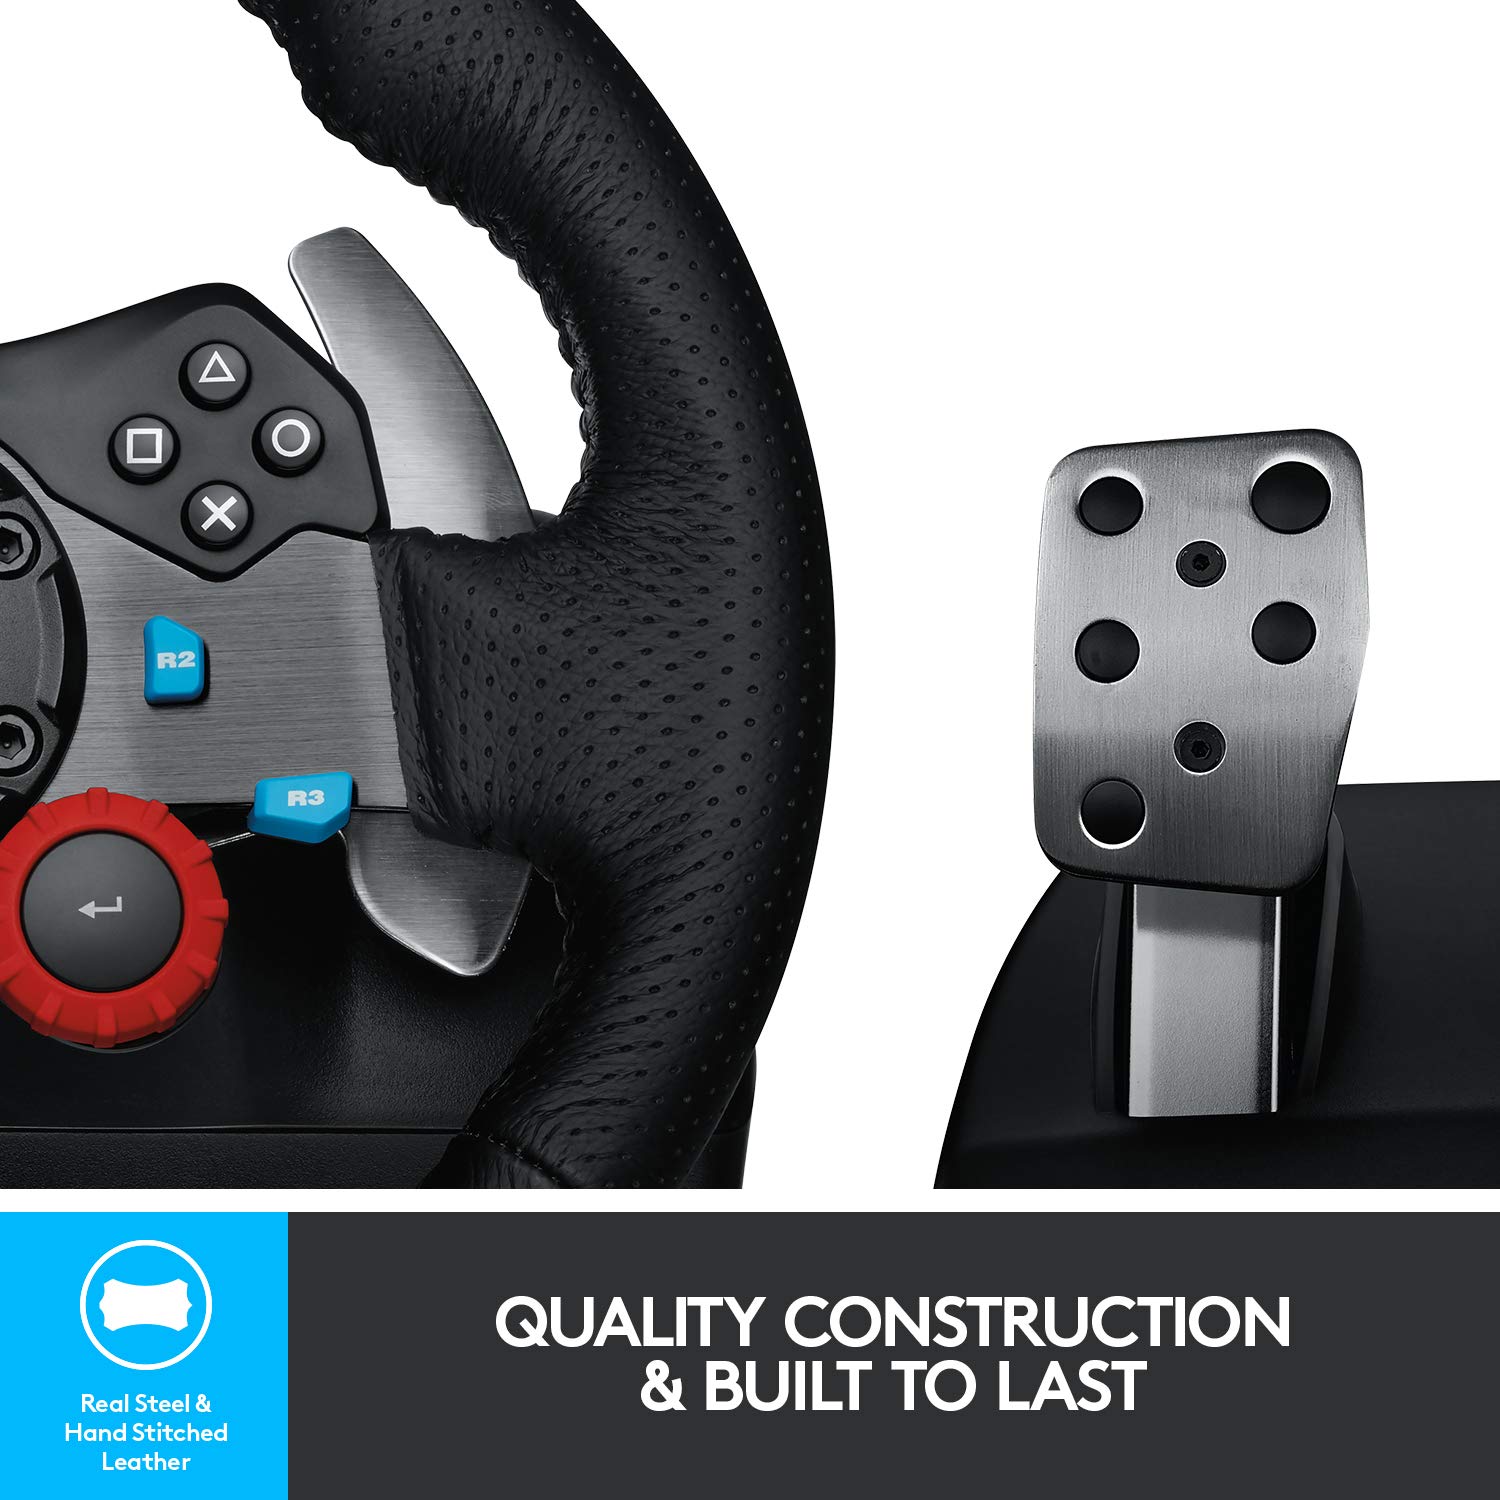 Logitech G29 Driving Force Shifter - Generation Space